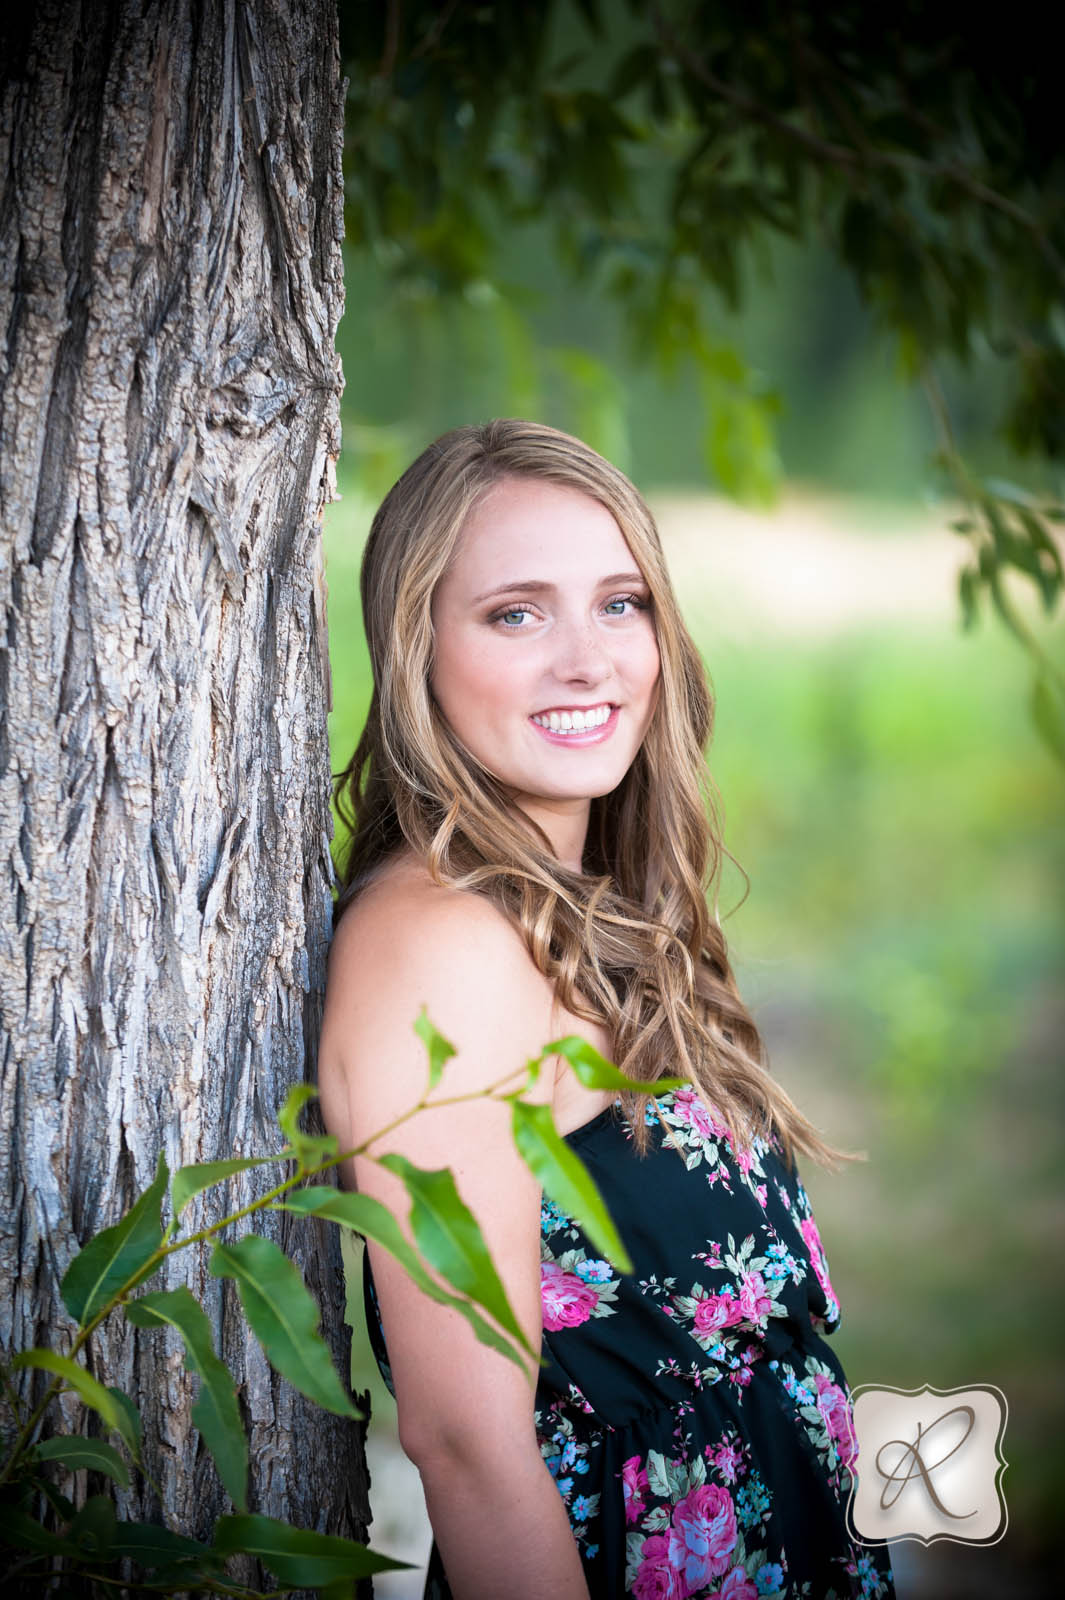 Carley | Senior Pictures with professional hair and make up - Durango